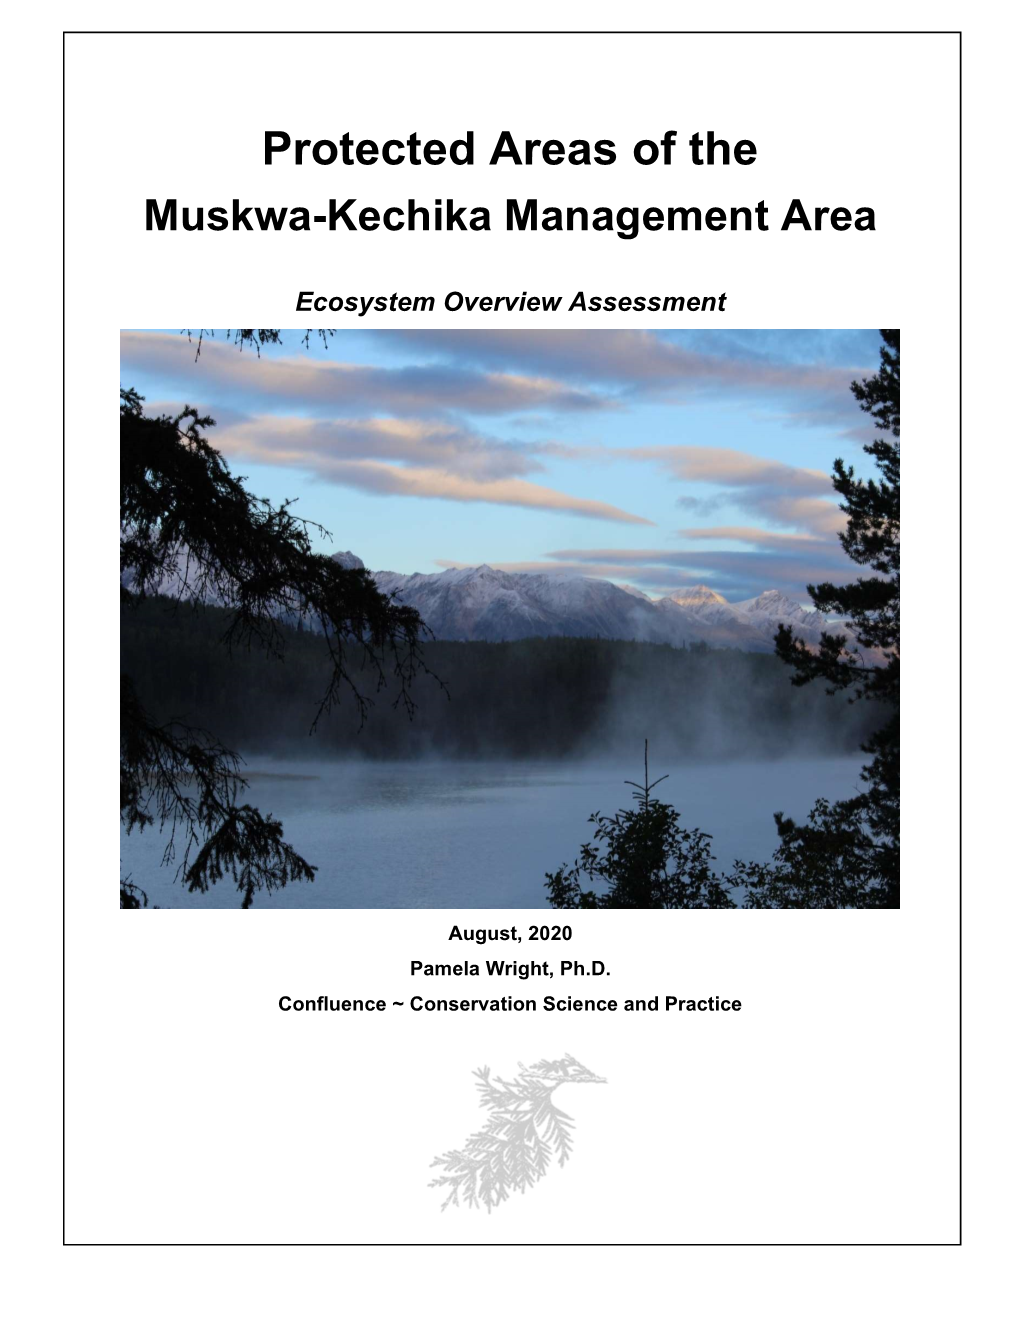 Protected Areas of the Muskwa-Kechika Management Area